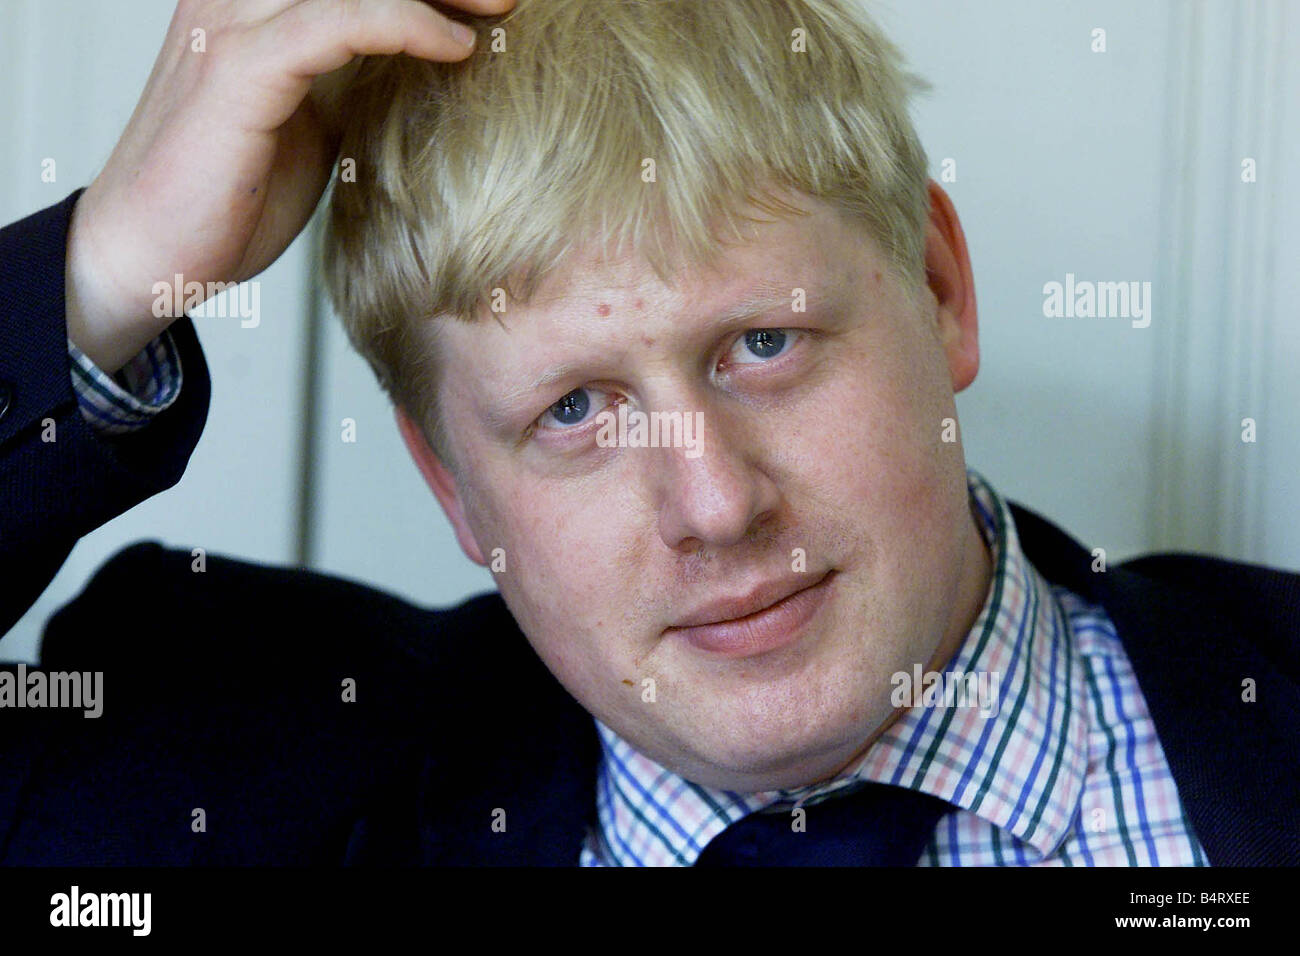 Boris Johnson conservative MP and editor of the Spectator magazine Seen here in the offices of the Spectator April 2000 Stock Photo